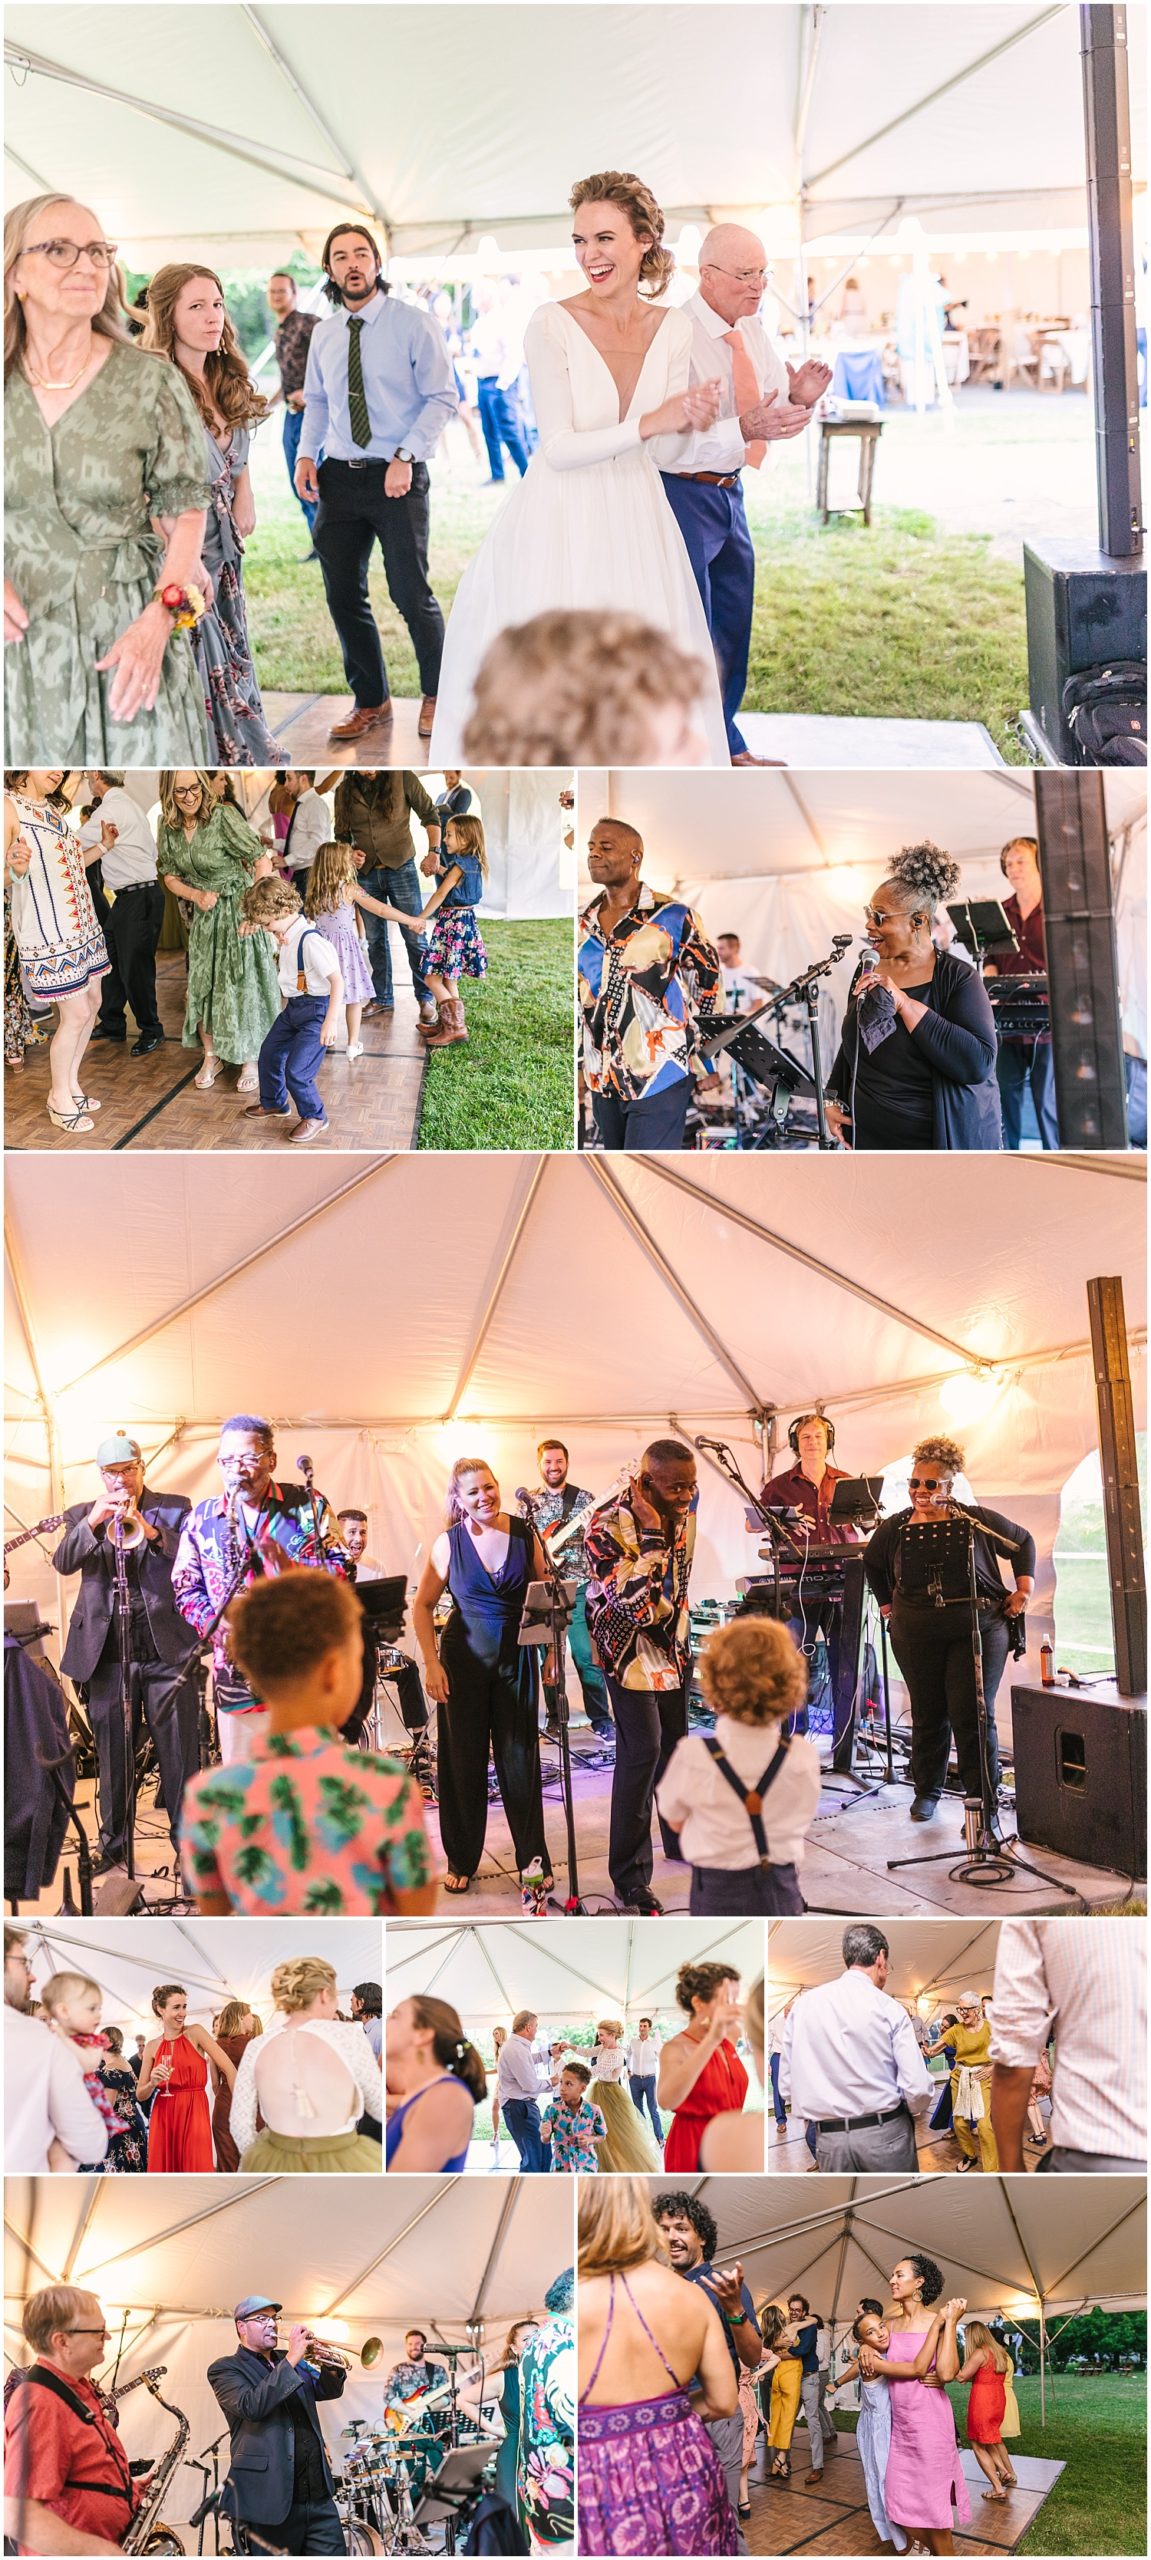 Denver band Tunisia does music for wedding reception at Pastures of Plenty Farm